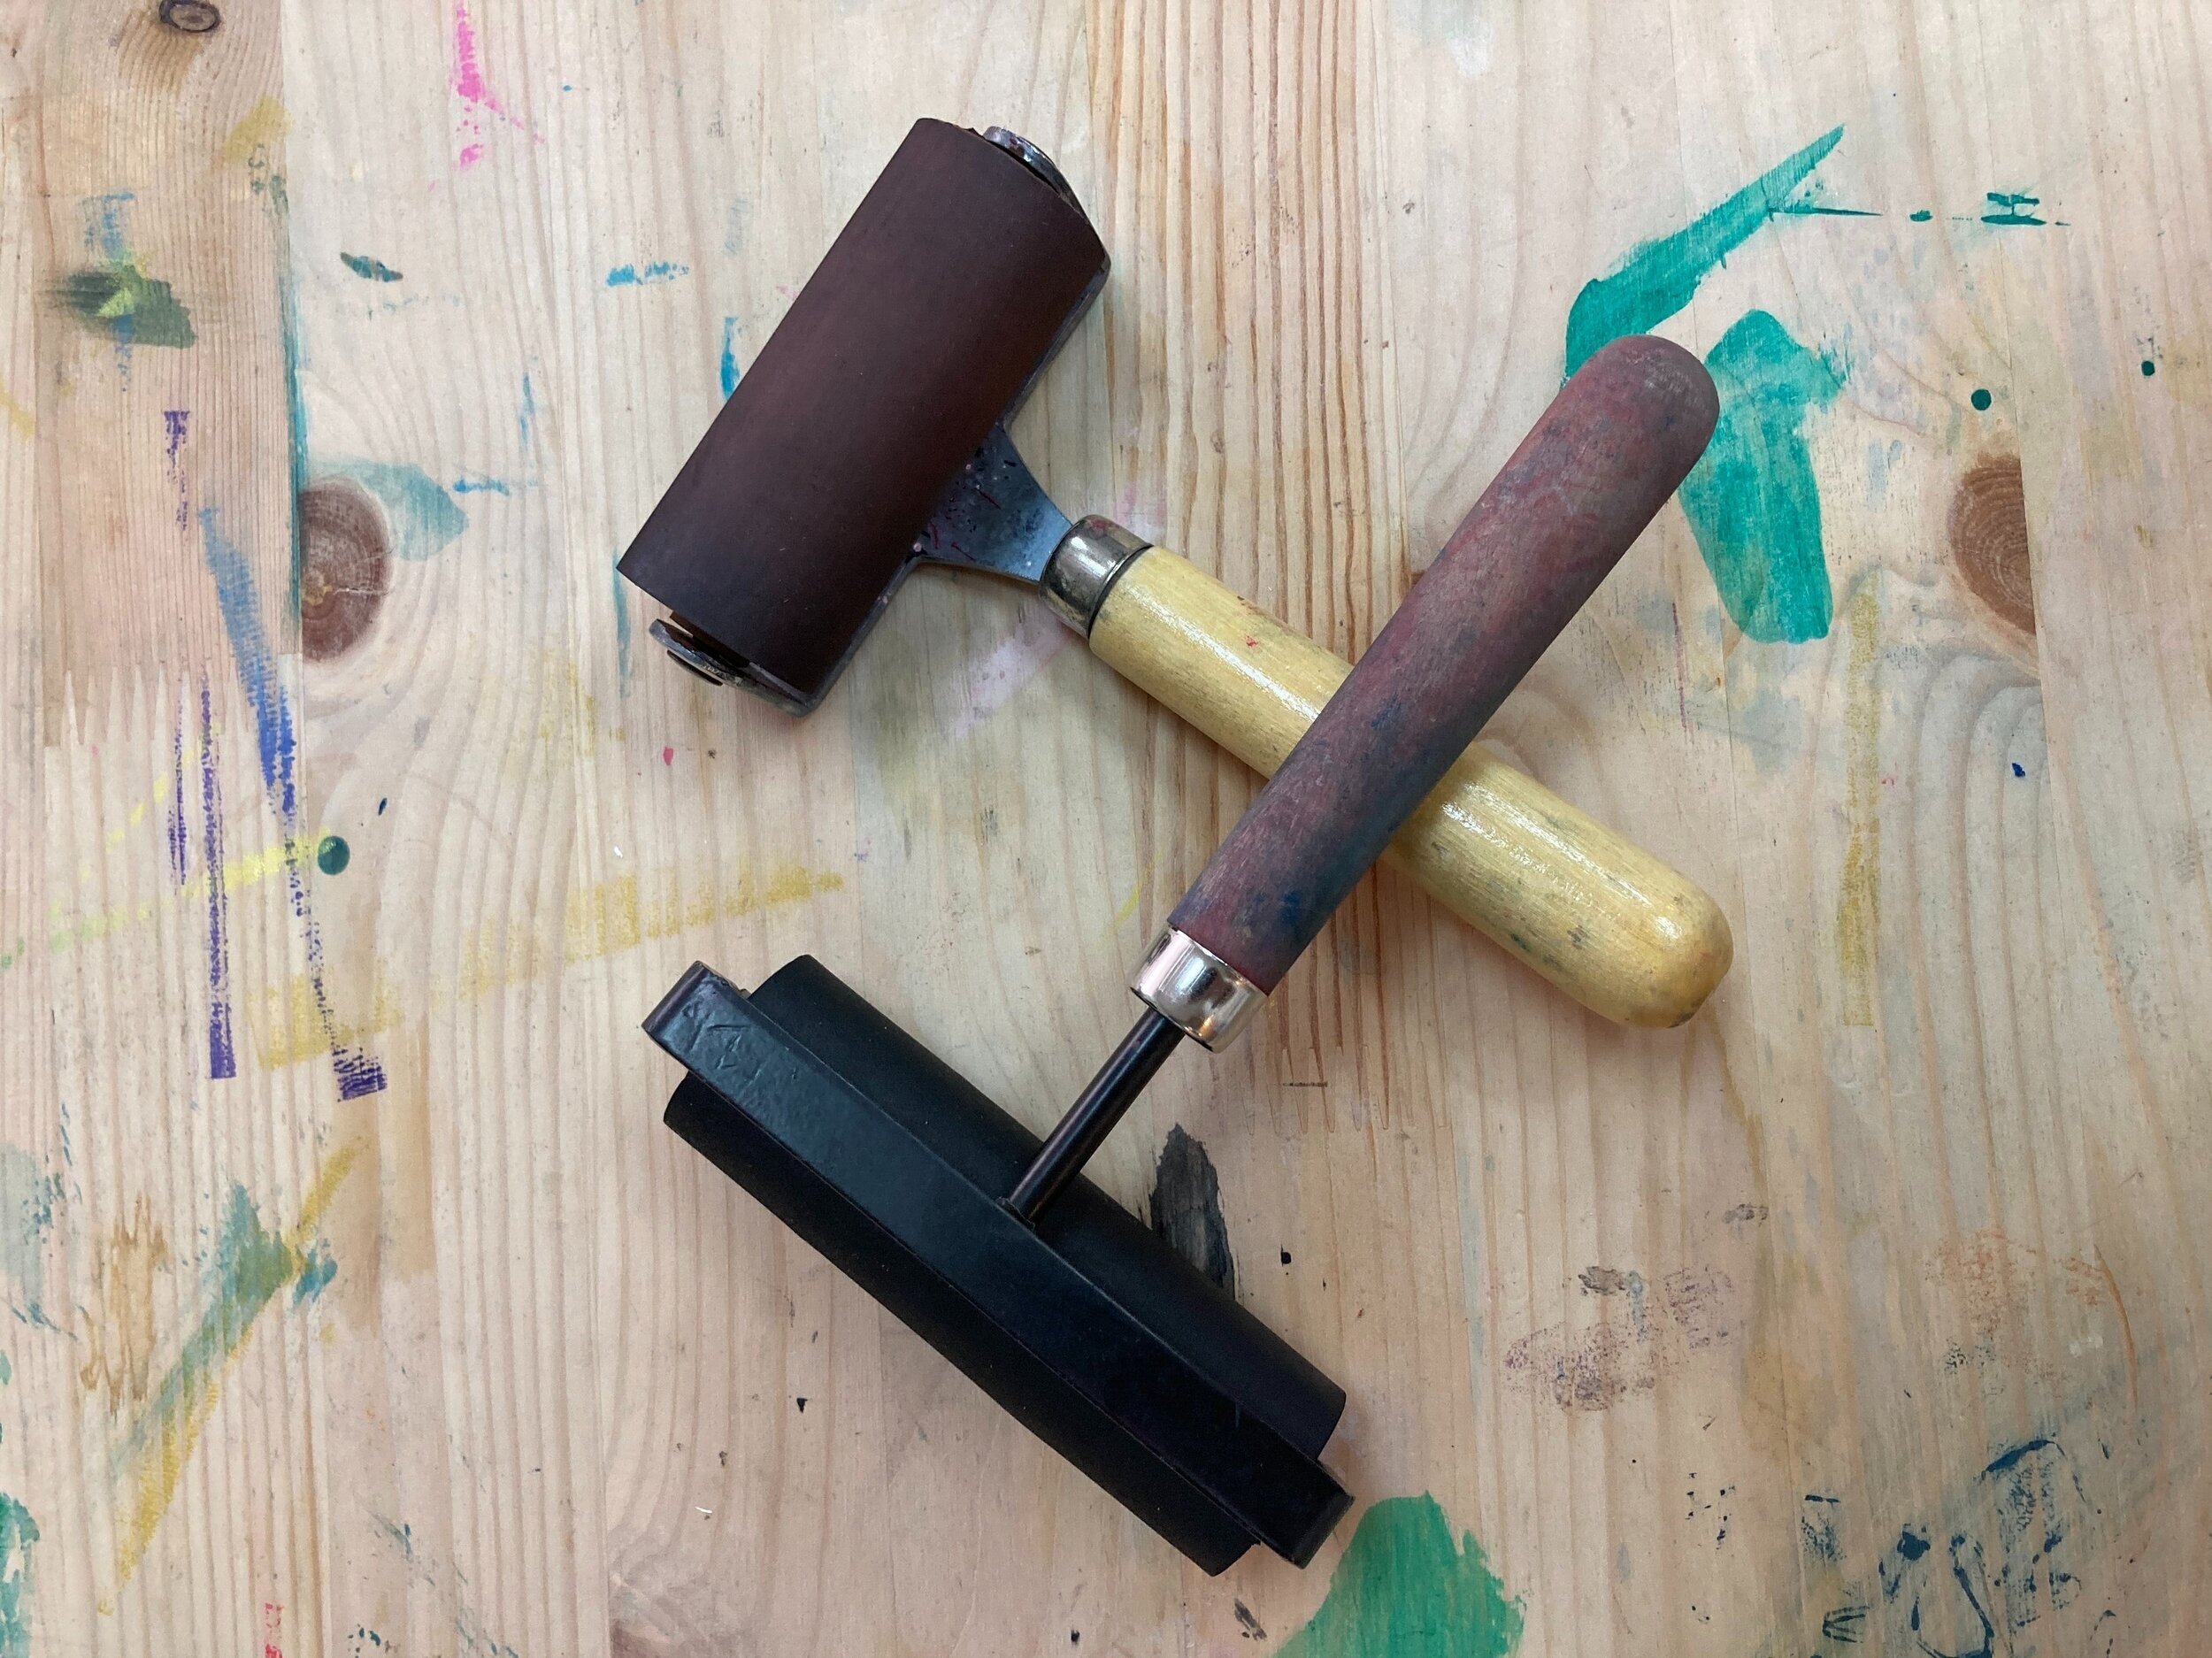 Ink roller or brayer, used for applying ink on the linoleum surface.